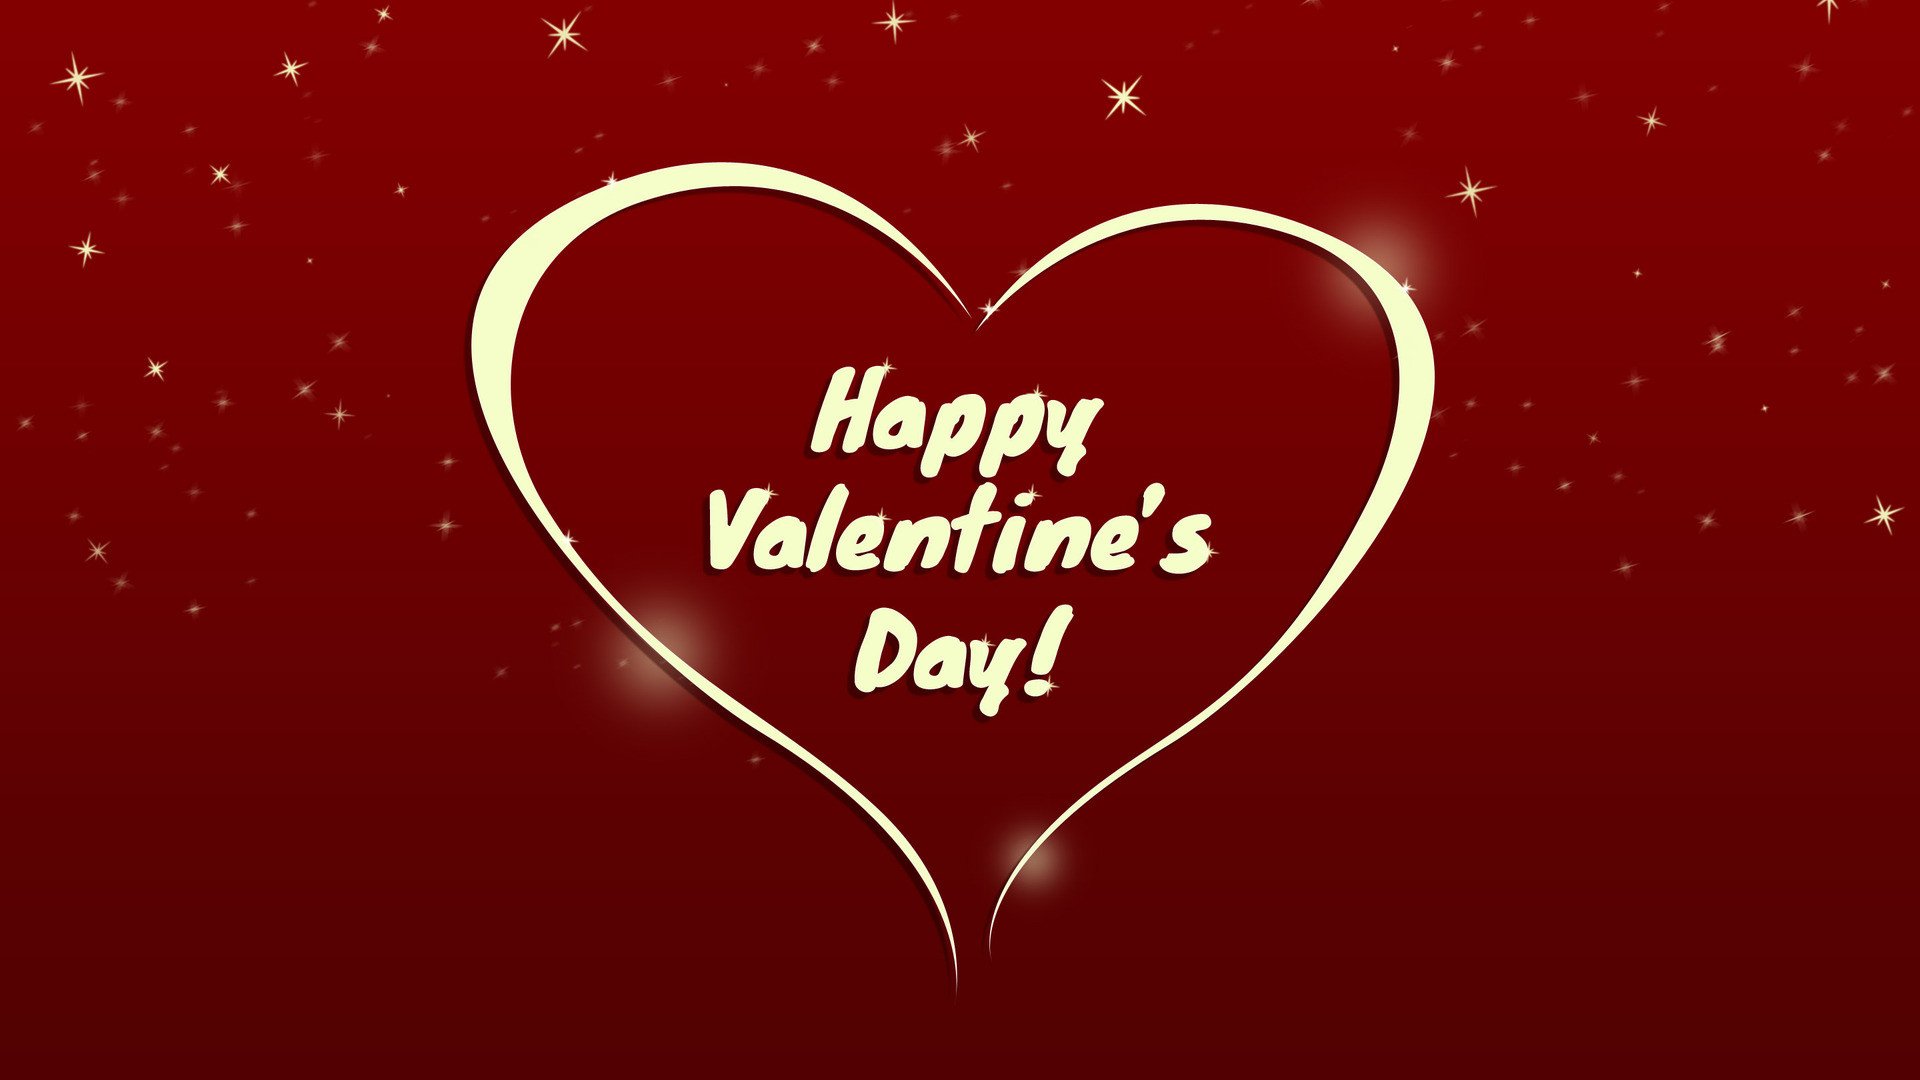 [10 Best] Valentine s Day PC Wallpapers to Make the Mood